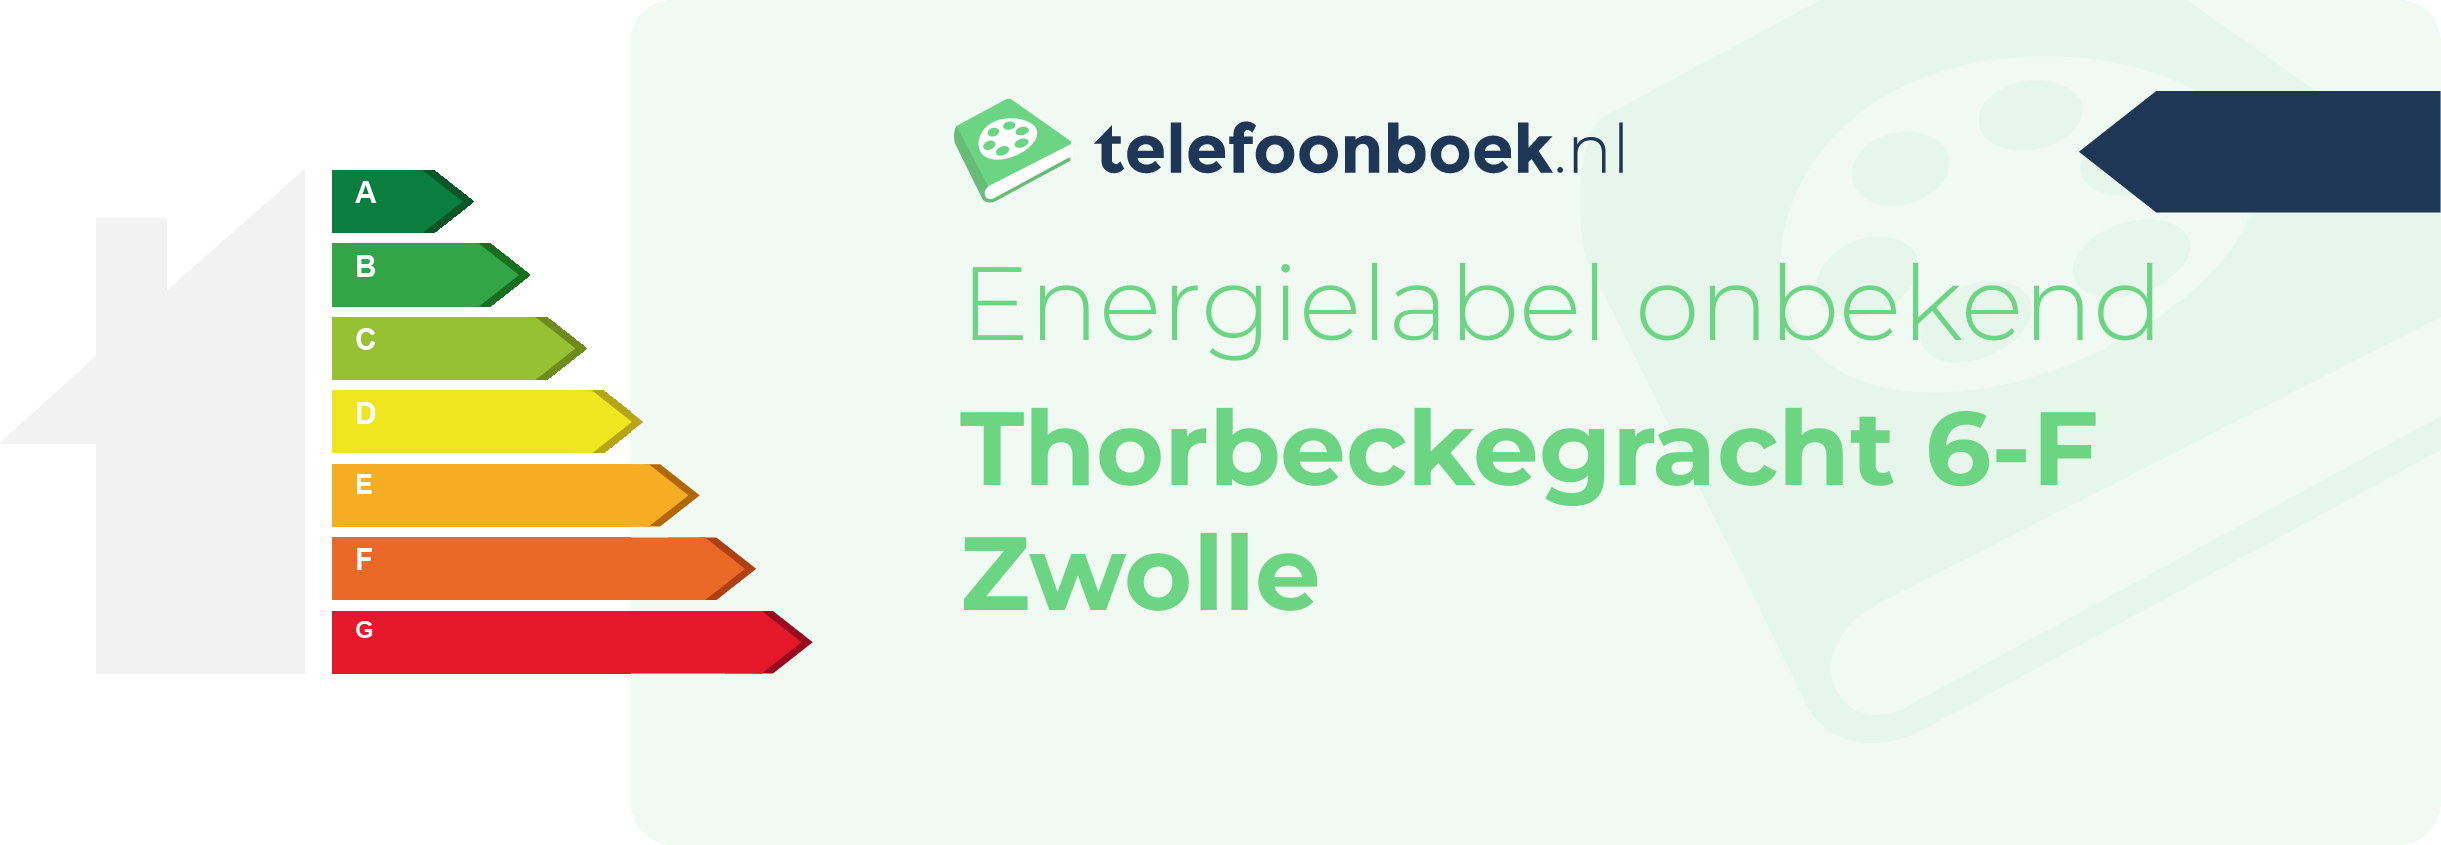 Energielabel Thorbeckegracht 6-F Zwolle